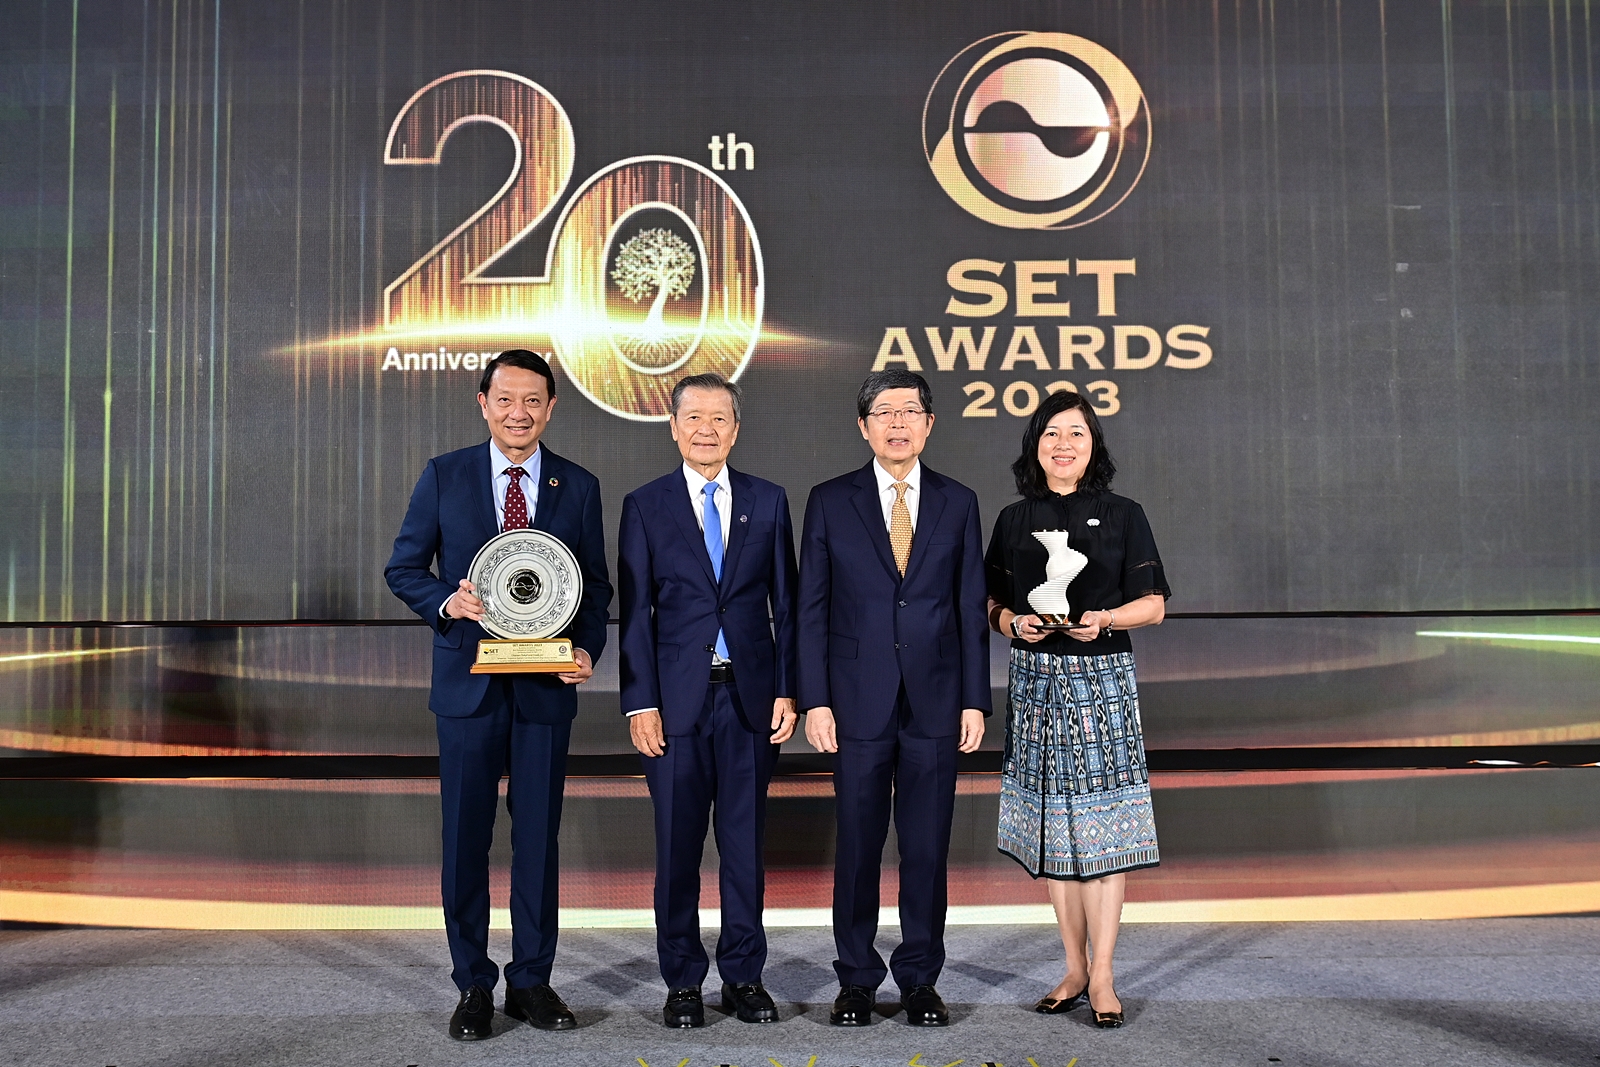 CP Foods Wins Two Prestigious Recognitions For its Innovation and Sustainability at SET AWARDS 2023